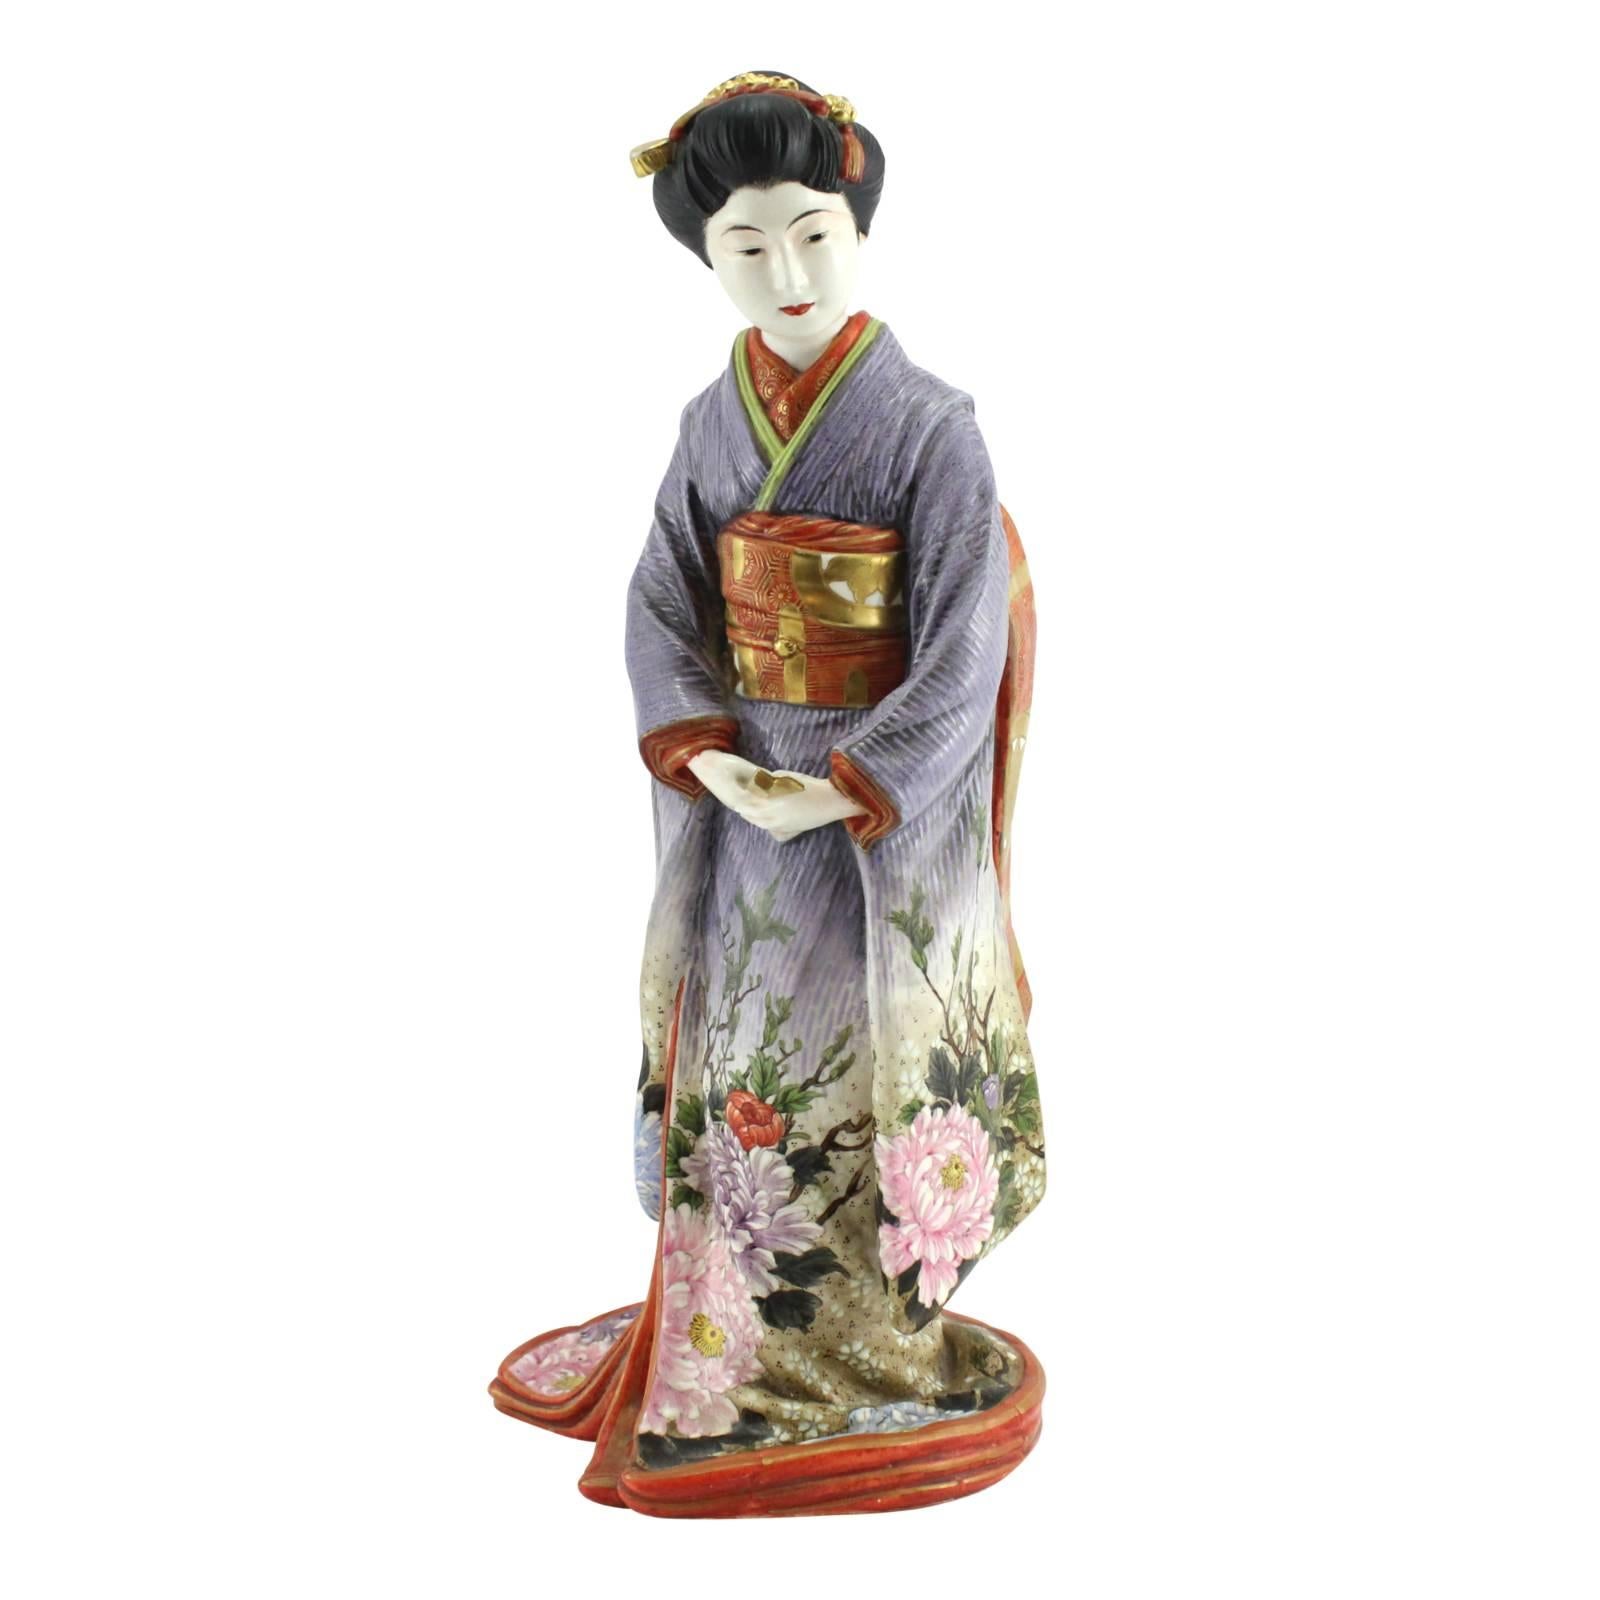 A Japanese Meiji period Awata / Kyoto ware geisha by Kinkozan Sobei. The textured purple kimono of the figure has been hand-painted with pink, blue, purple, and red flowers that flow up the robe. The folds, trim, cuffs, and neck of the kimono are